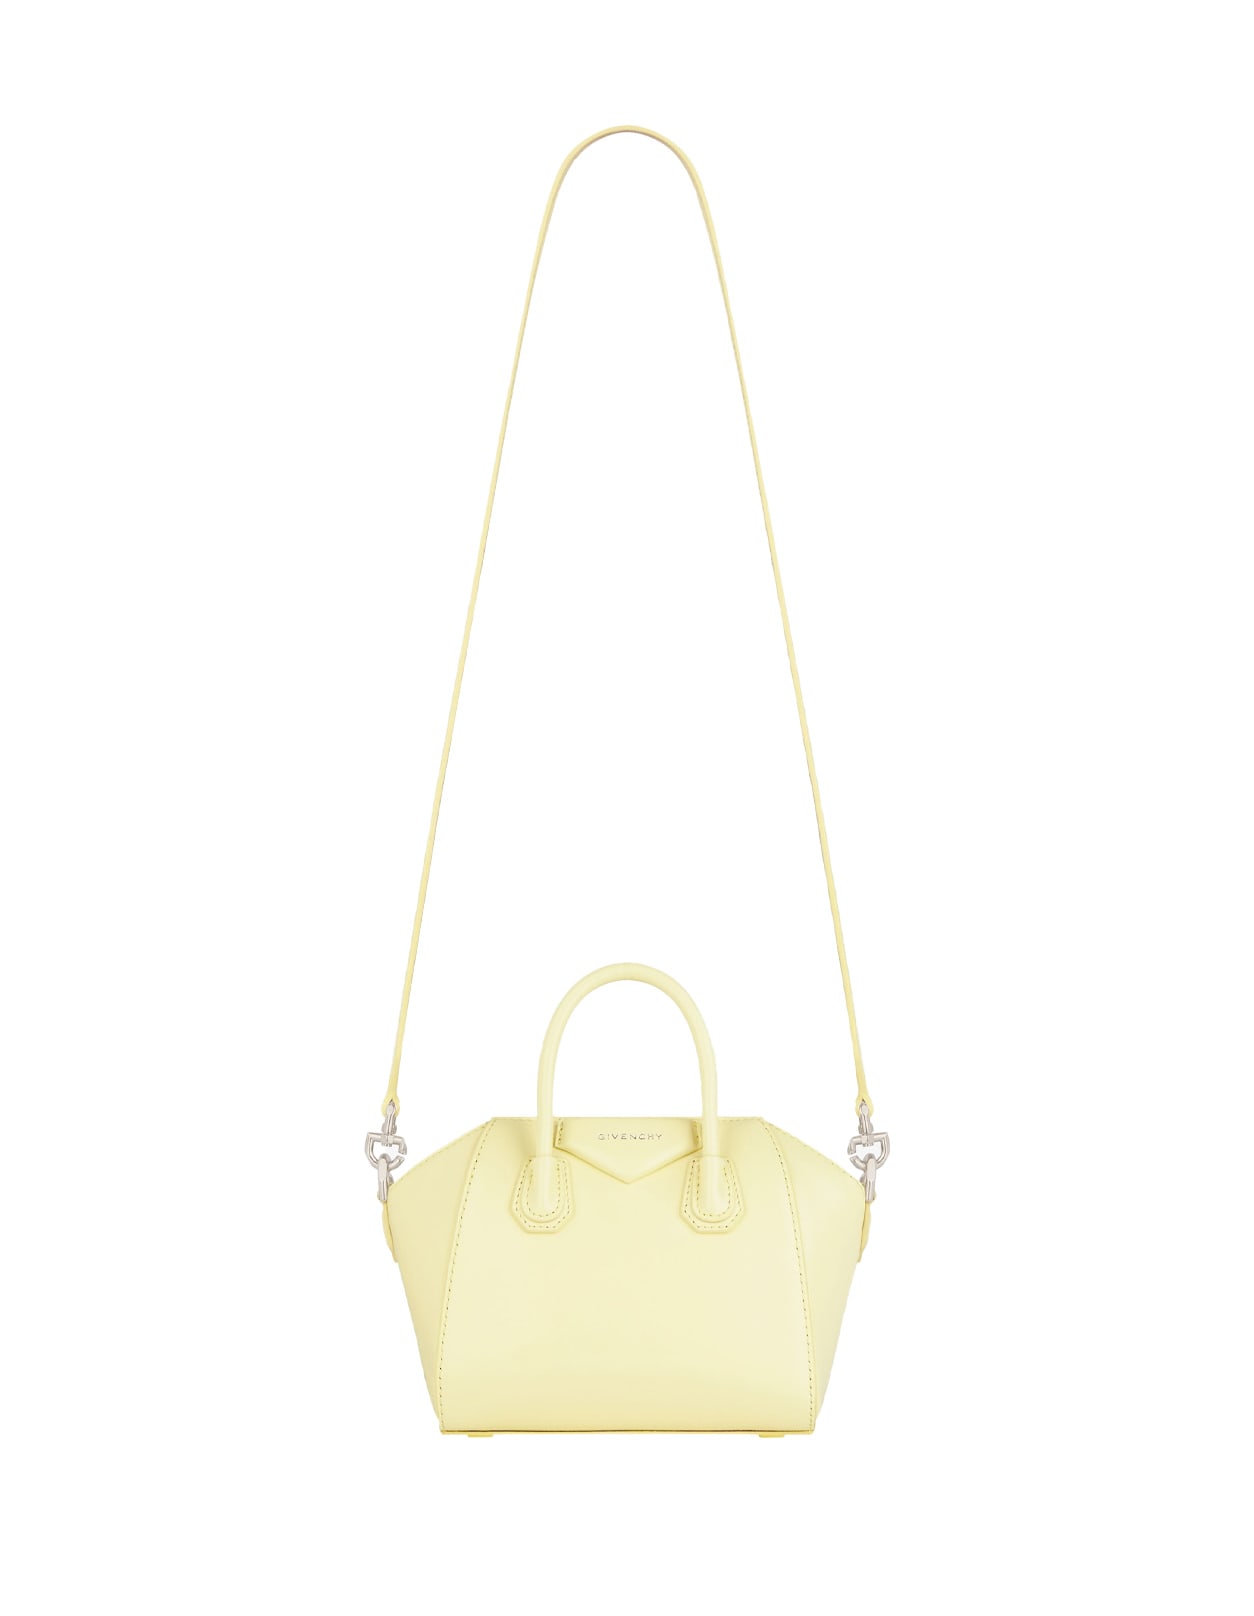 Shop Givenchy Antigona Toy Bag In Soft Yellow And Natural Beige Box Leather